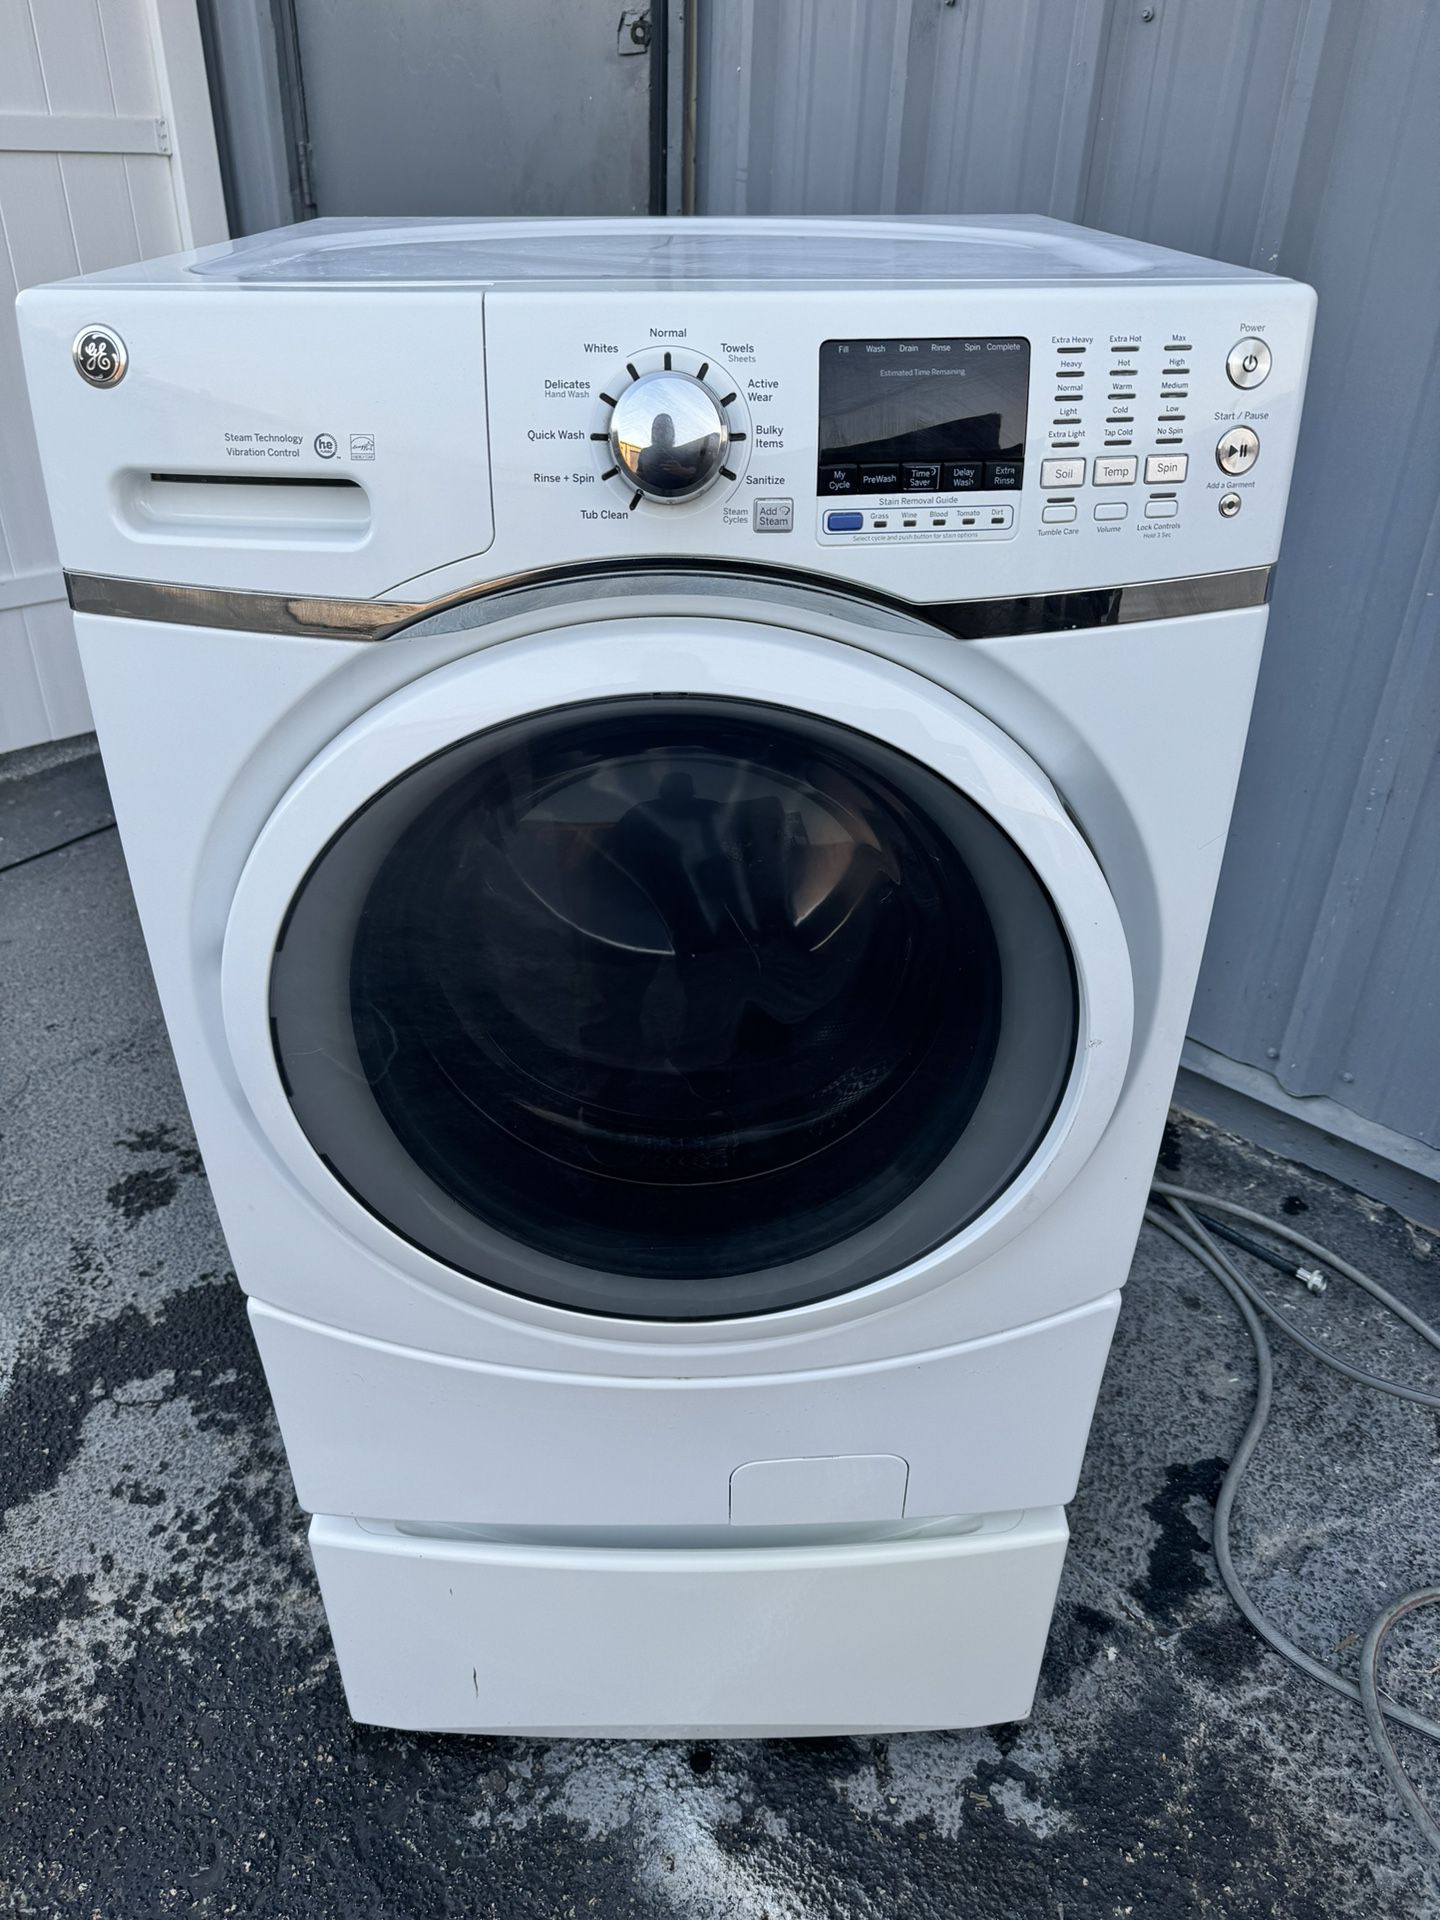 Ge Washer With Pedestal 